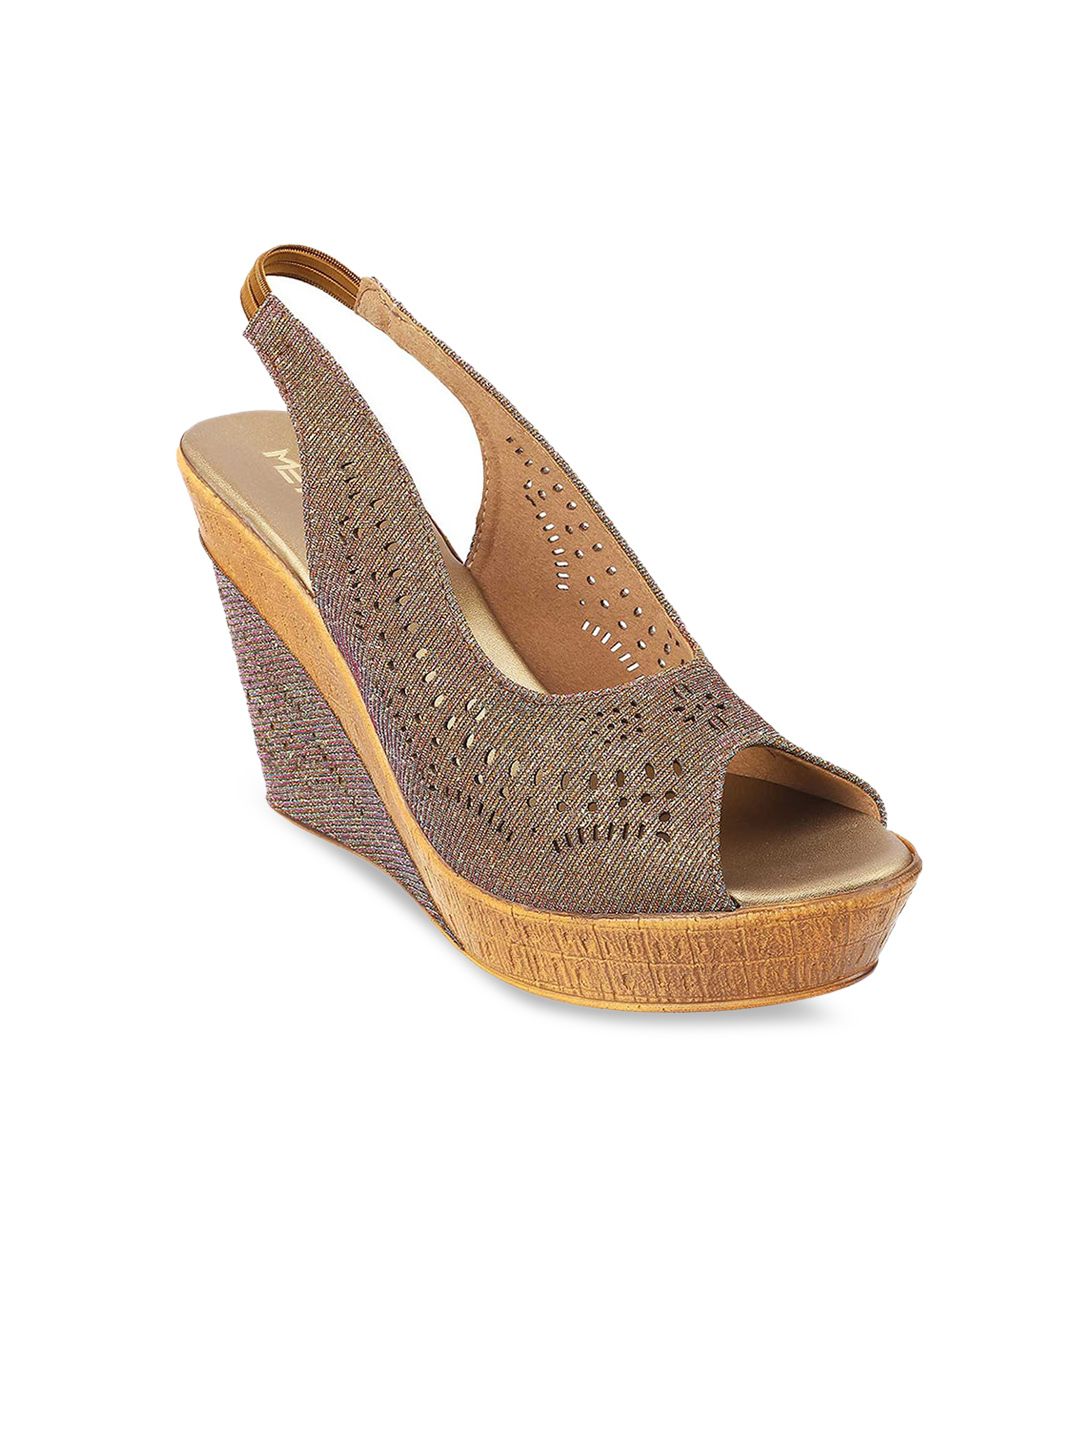 Metro Gold-Toned Embellished Wedge Peep Toes with Laser Cuts Price in India